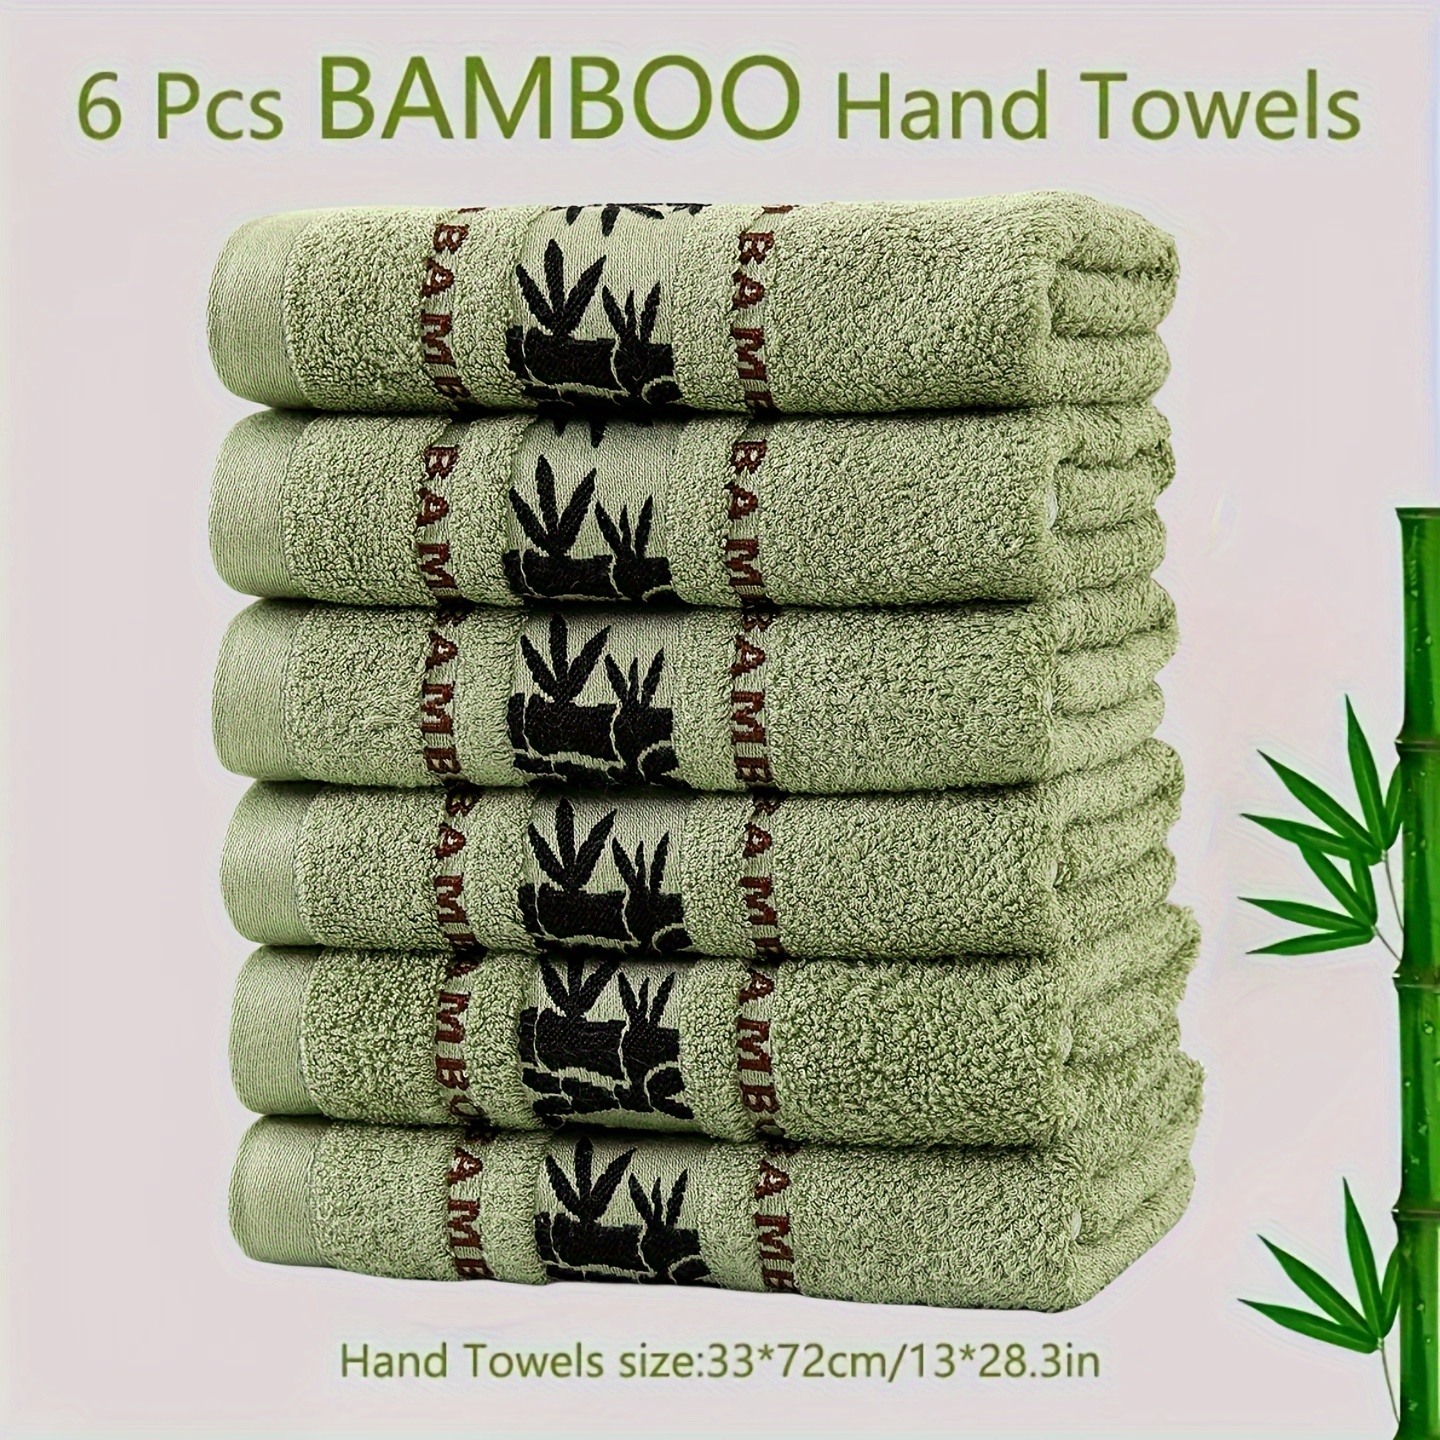 

6pcs Bamboo Embroidered Hand Towel Set, Absorbent & Quick-drying Showering Towel, Super Soft & Skin-friendly Bathing Towel, For Home Bathroom, Ideal Bathroom Supplies